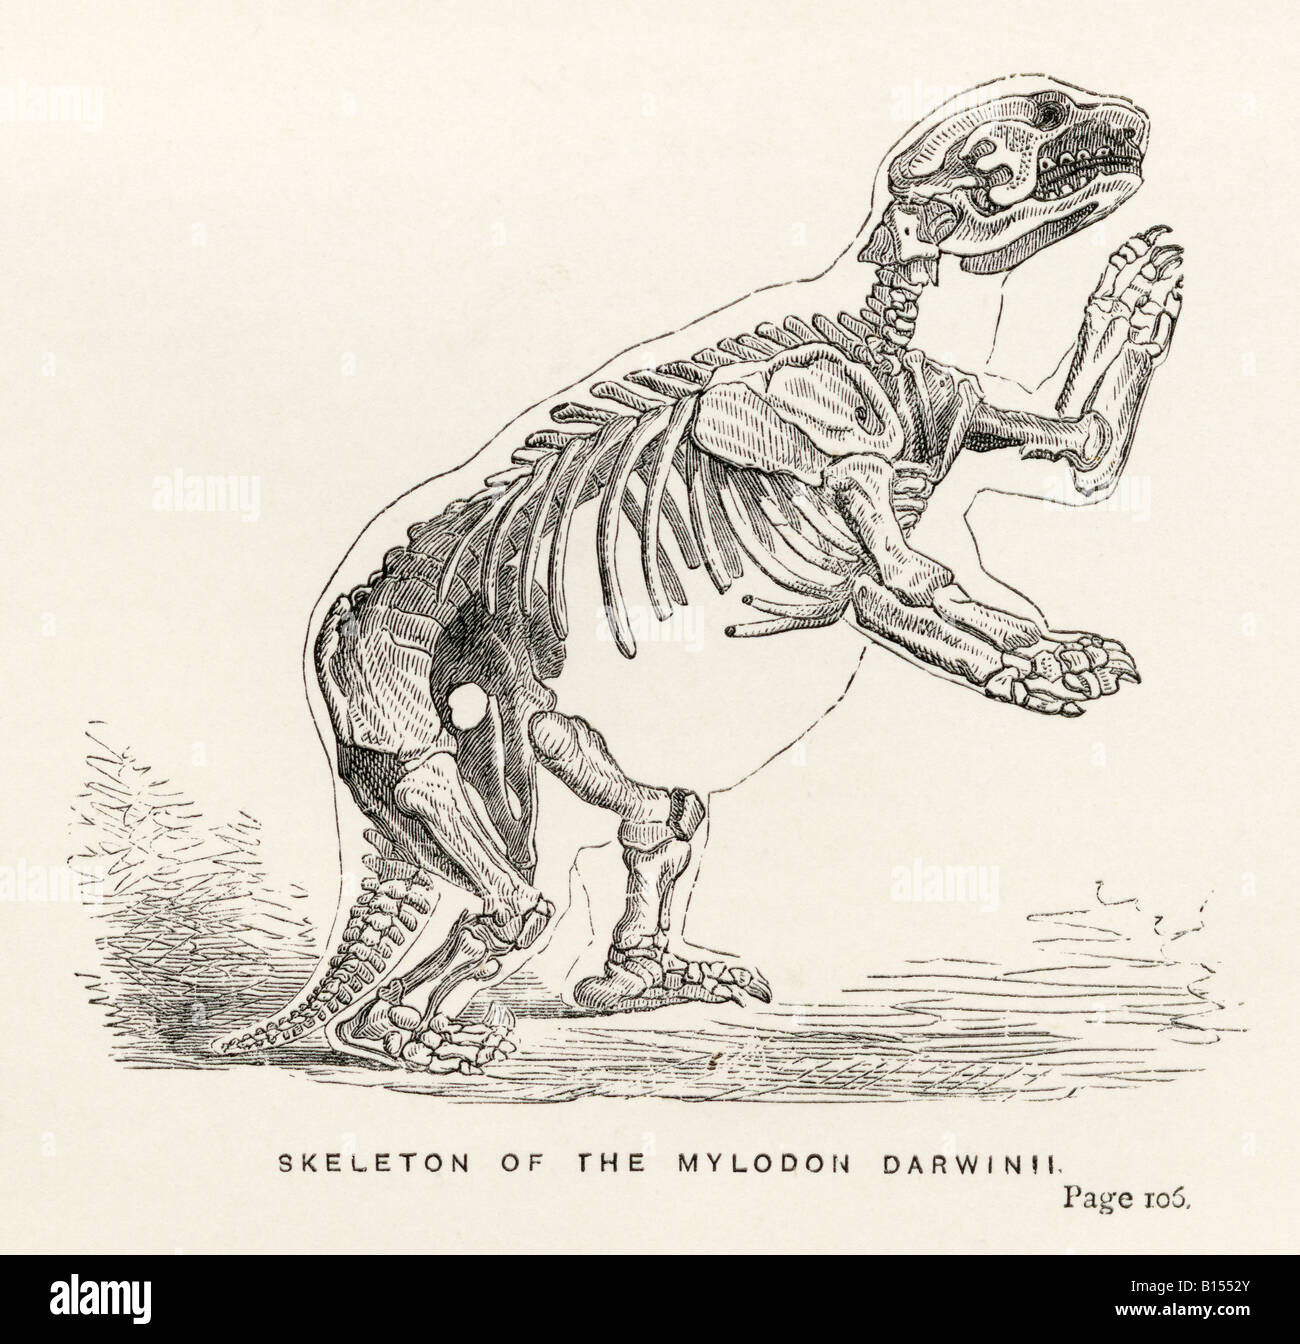 Skeleton of Mylodon Darwinii.  From the book Journal of Researches by Charles Darwin. Stock Photo